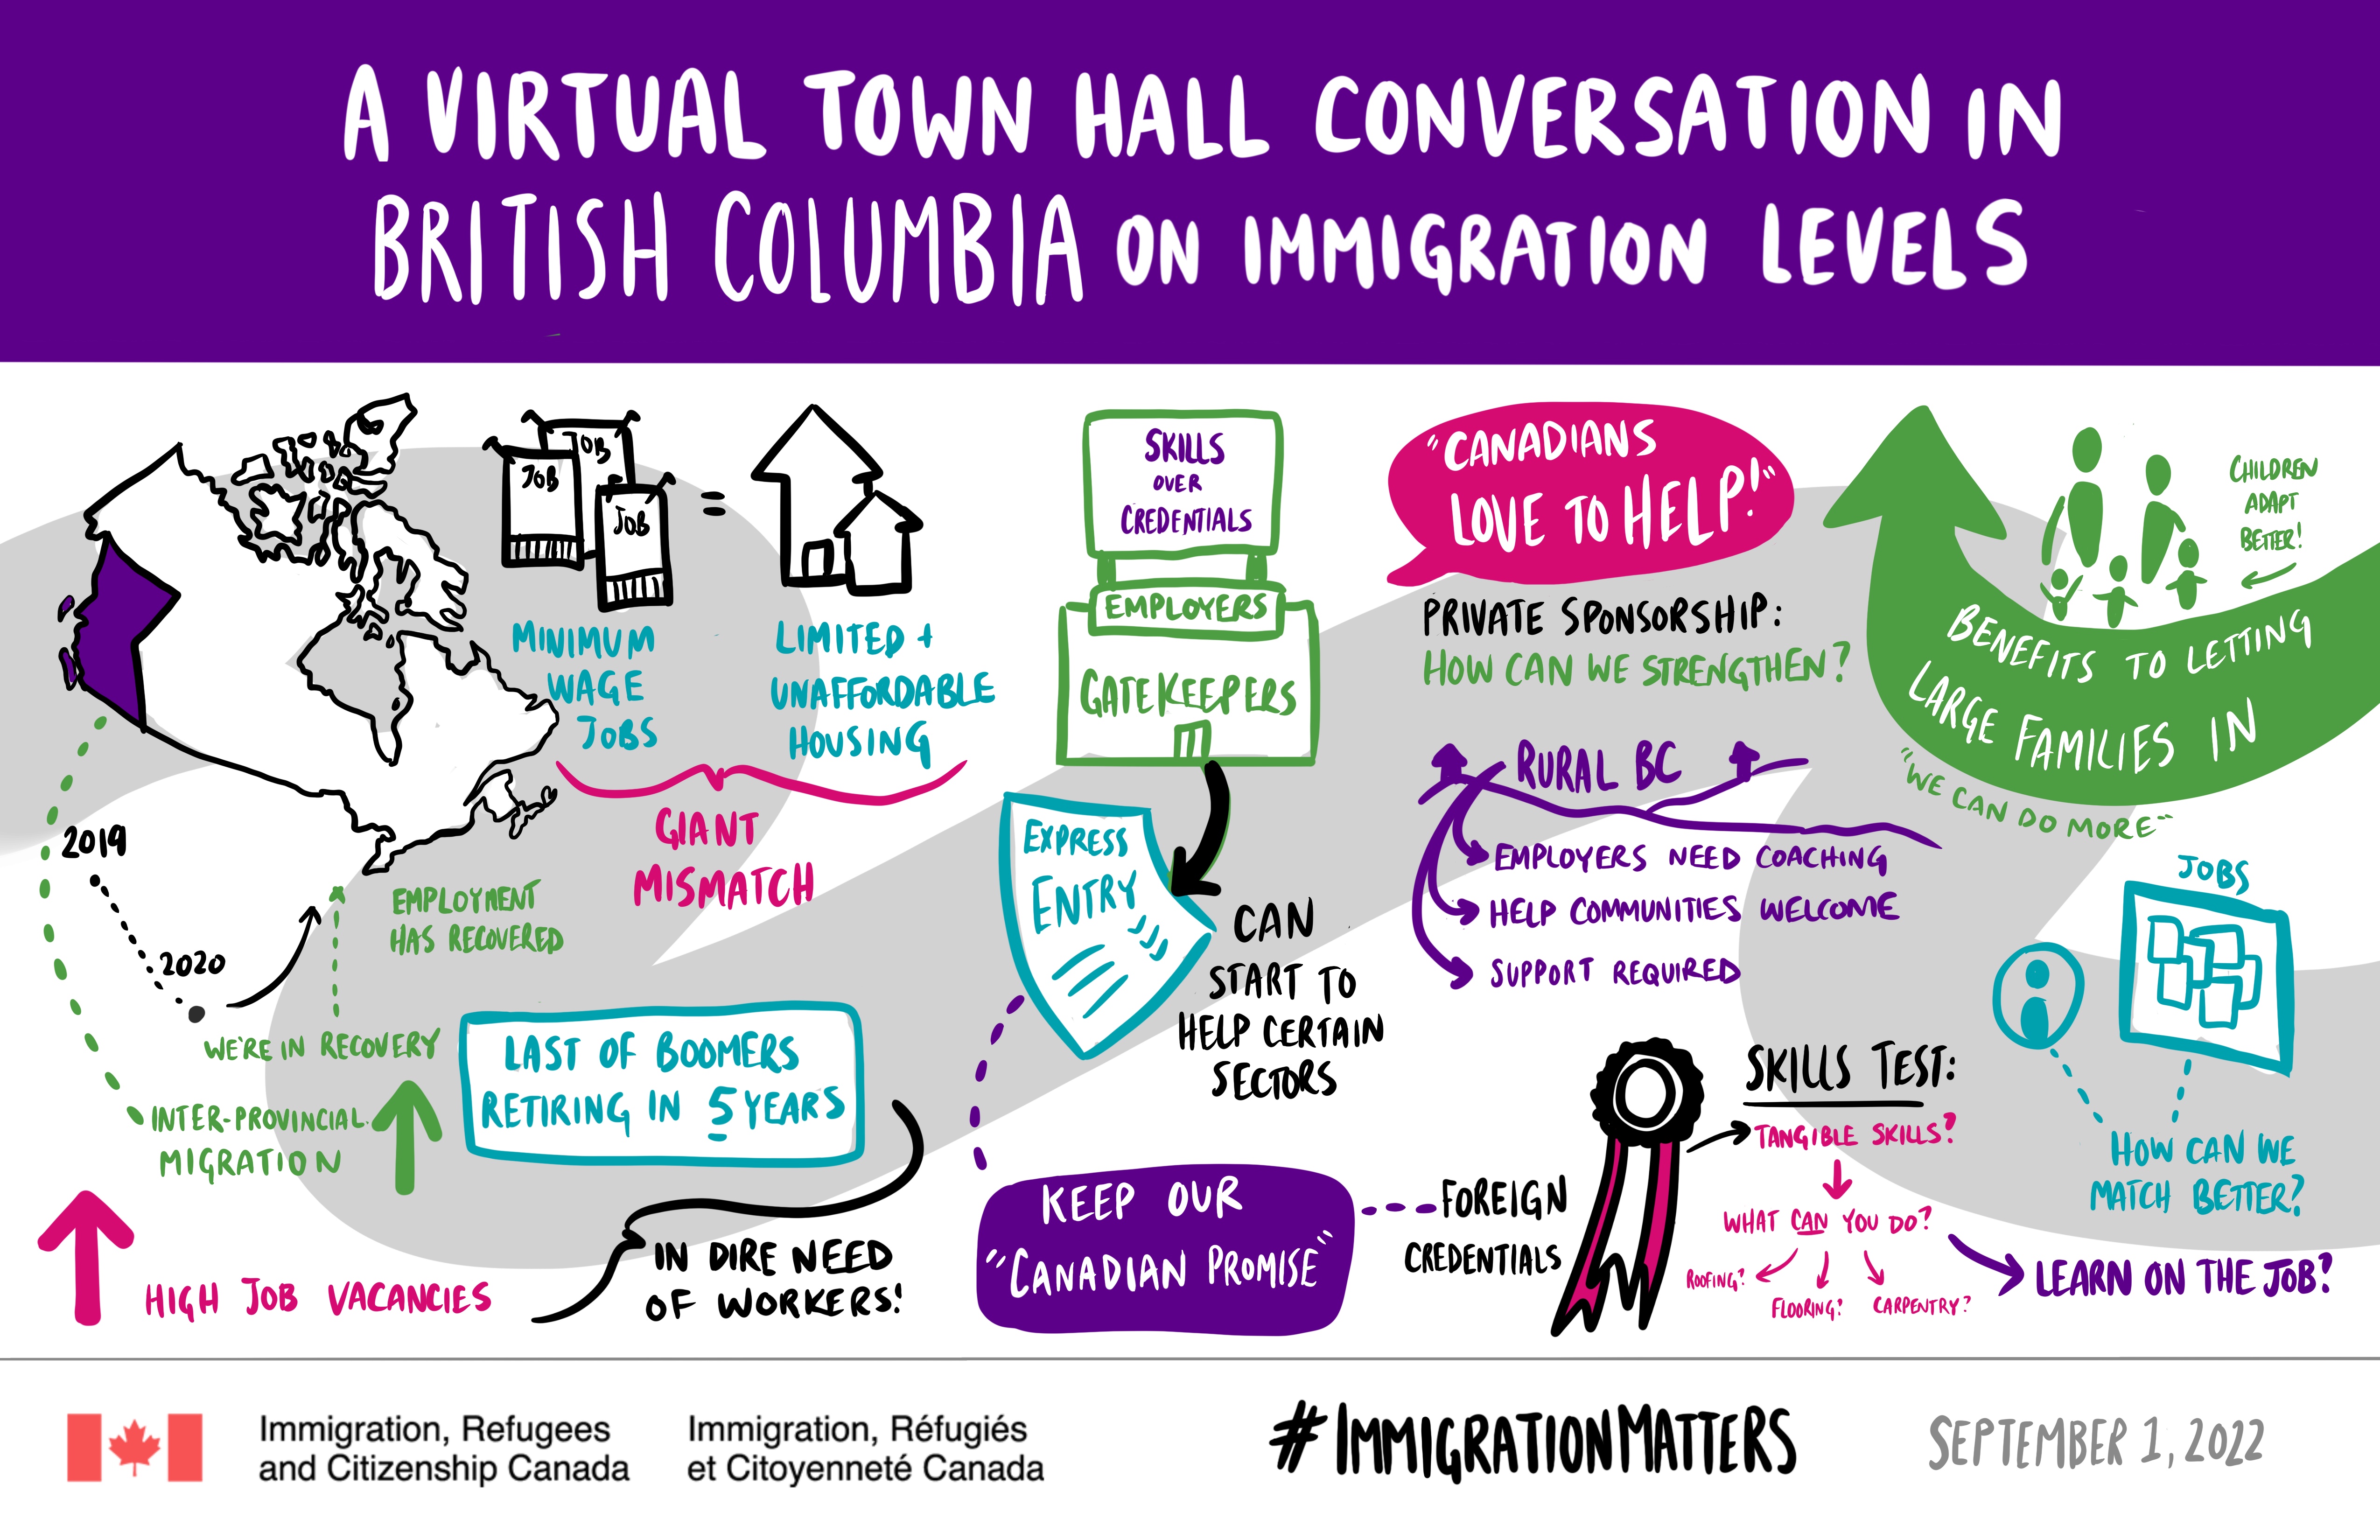 A virtual town hall conversation in British Columbia on immigration levels